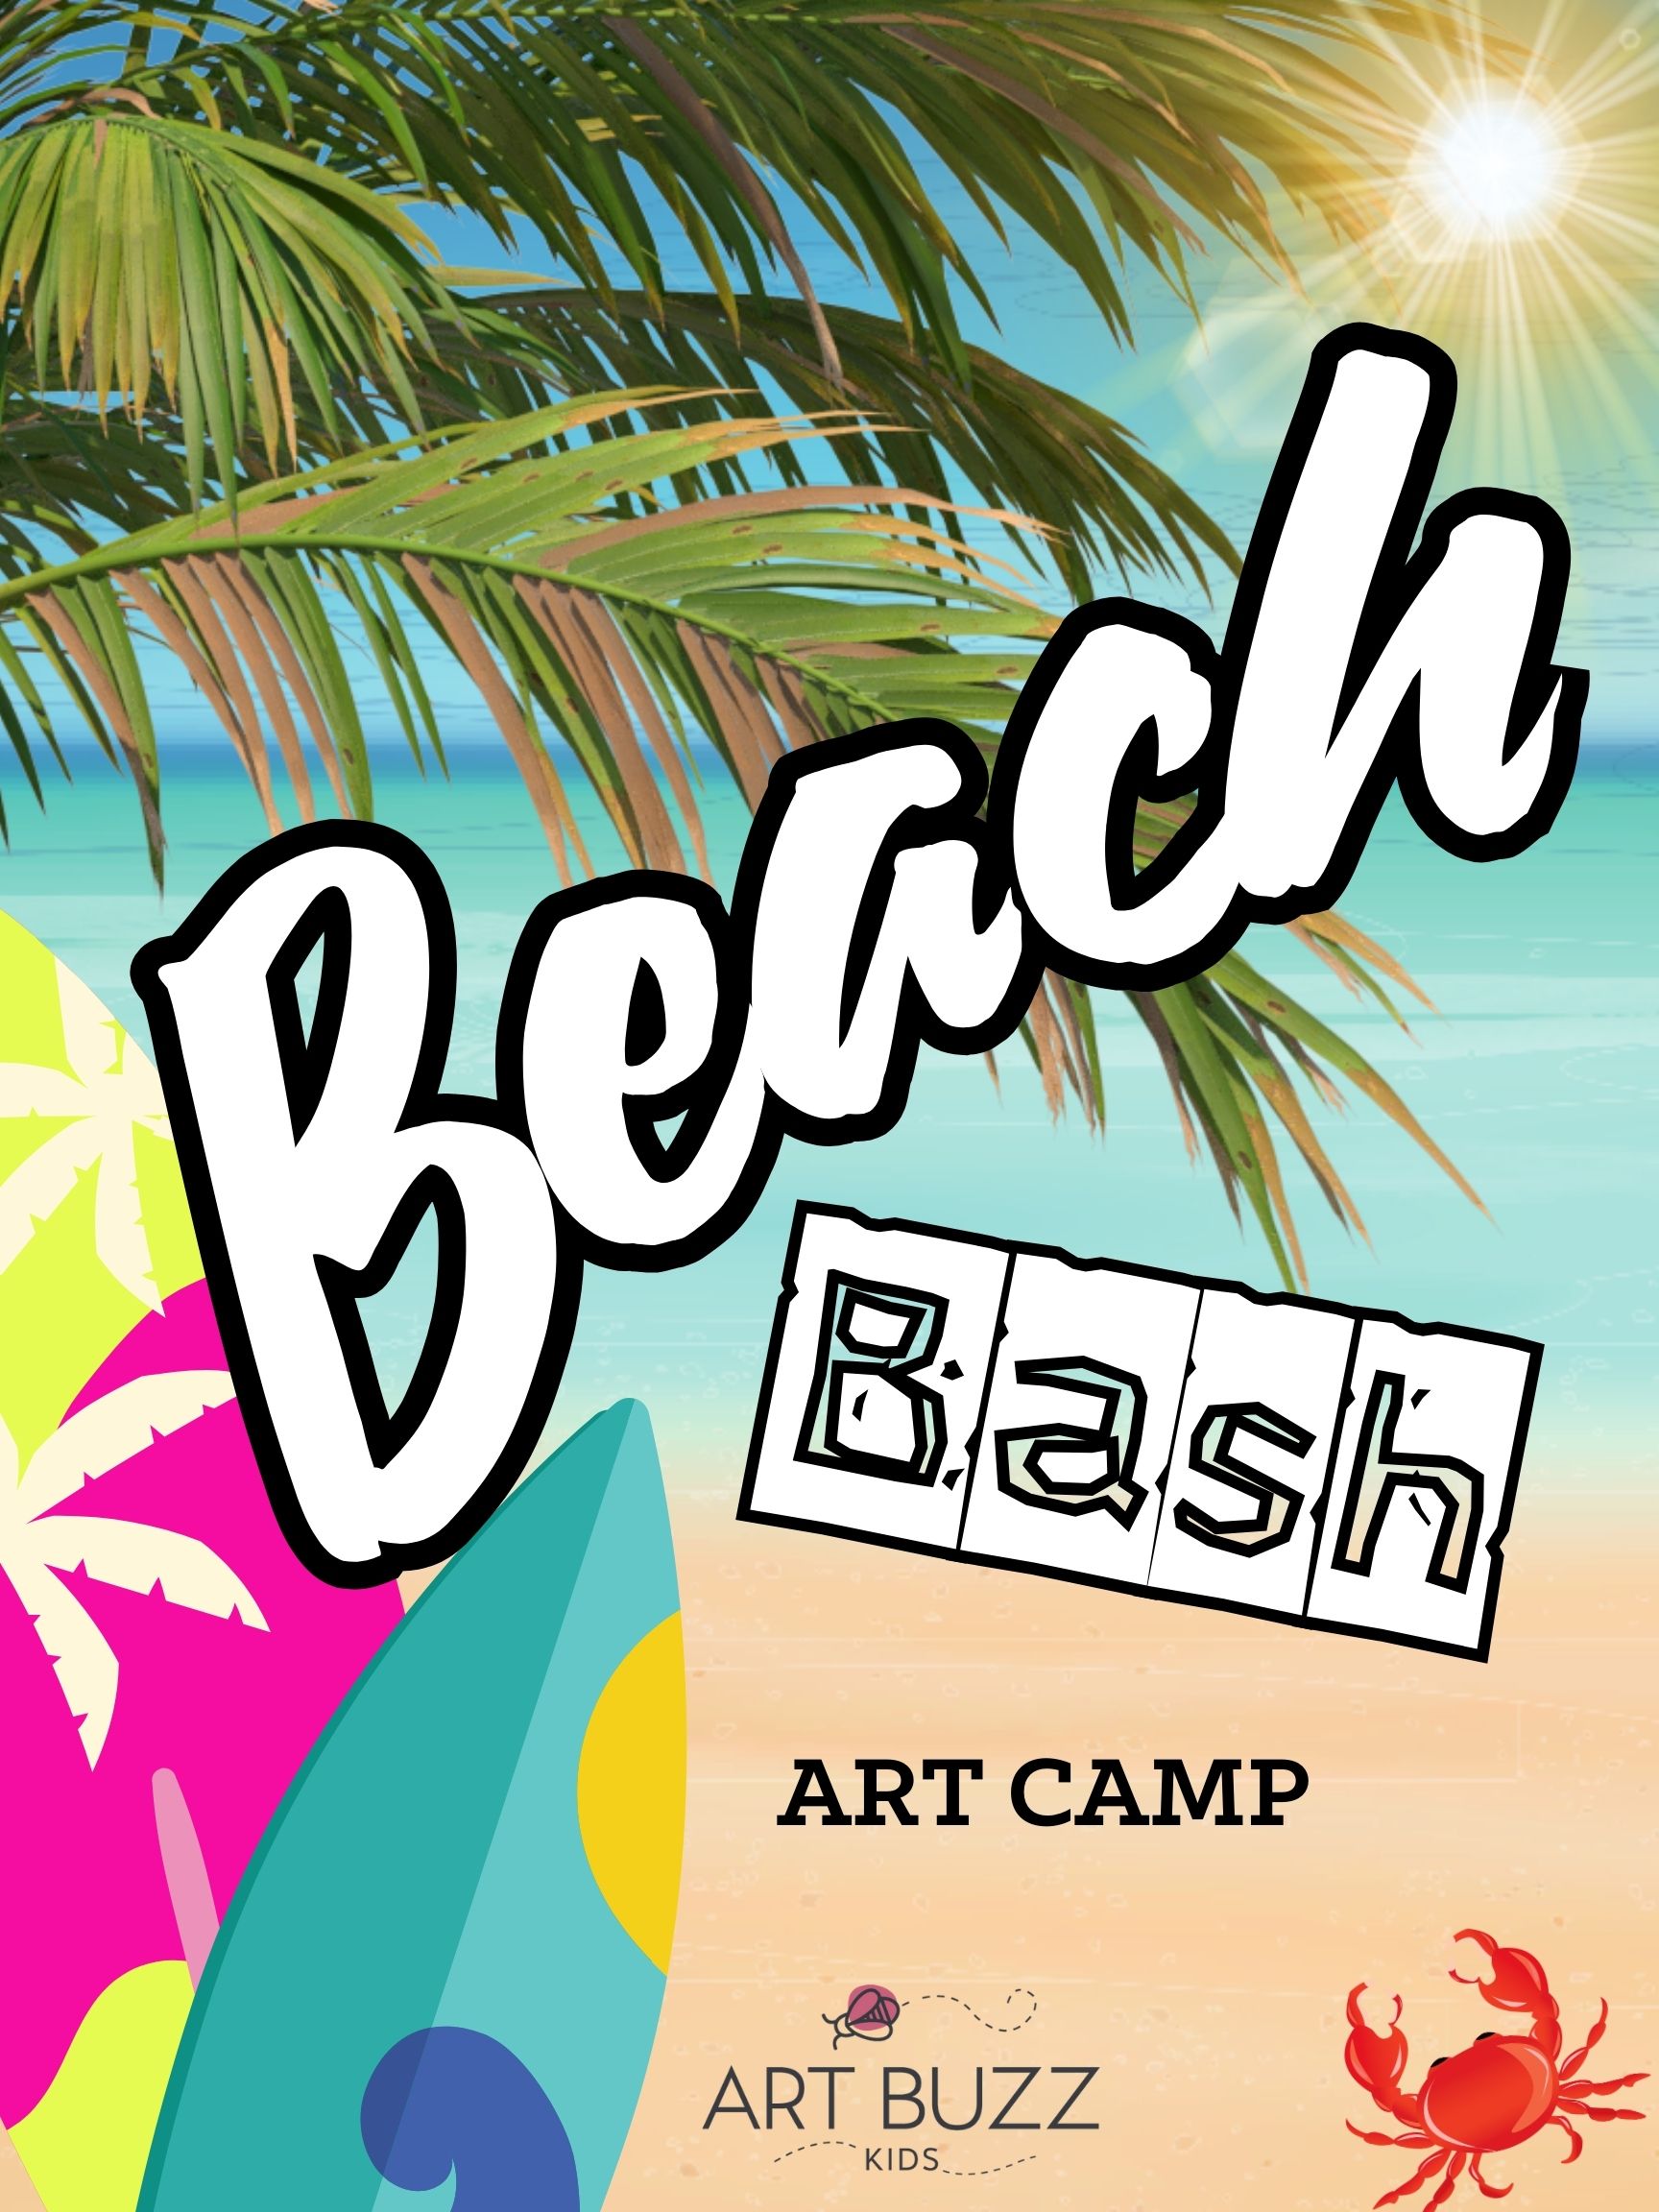 BEACH BASH Art Camp | HALF DAY MONDAY - FRIDAY 9:00 AM TO 1:00 PM | $100 DEPOSIT AT REGISTRATION IS REQUIRED